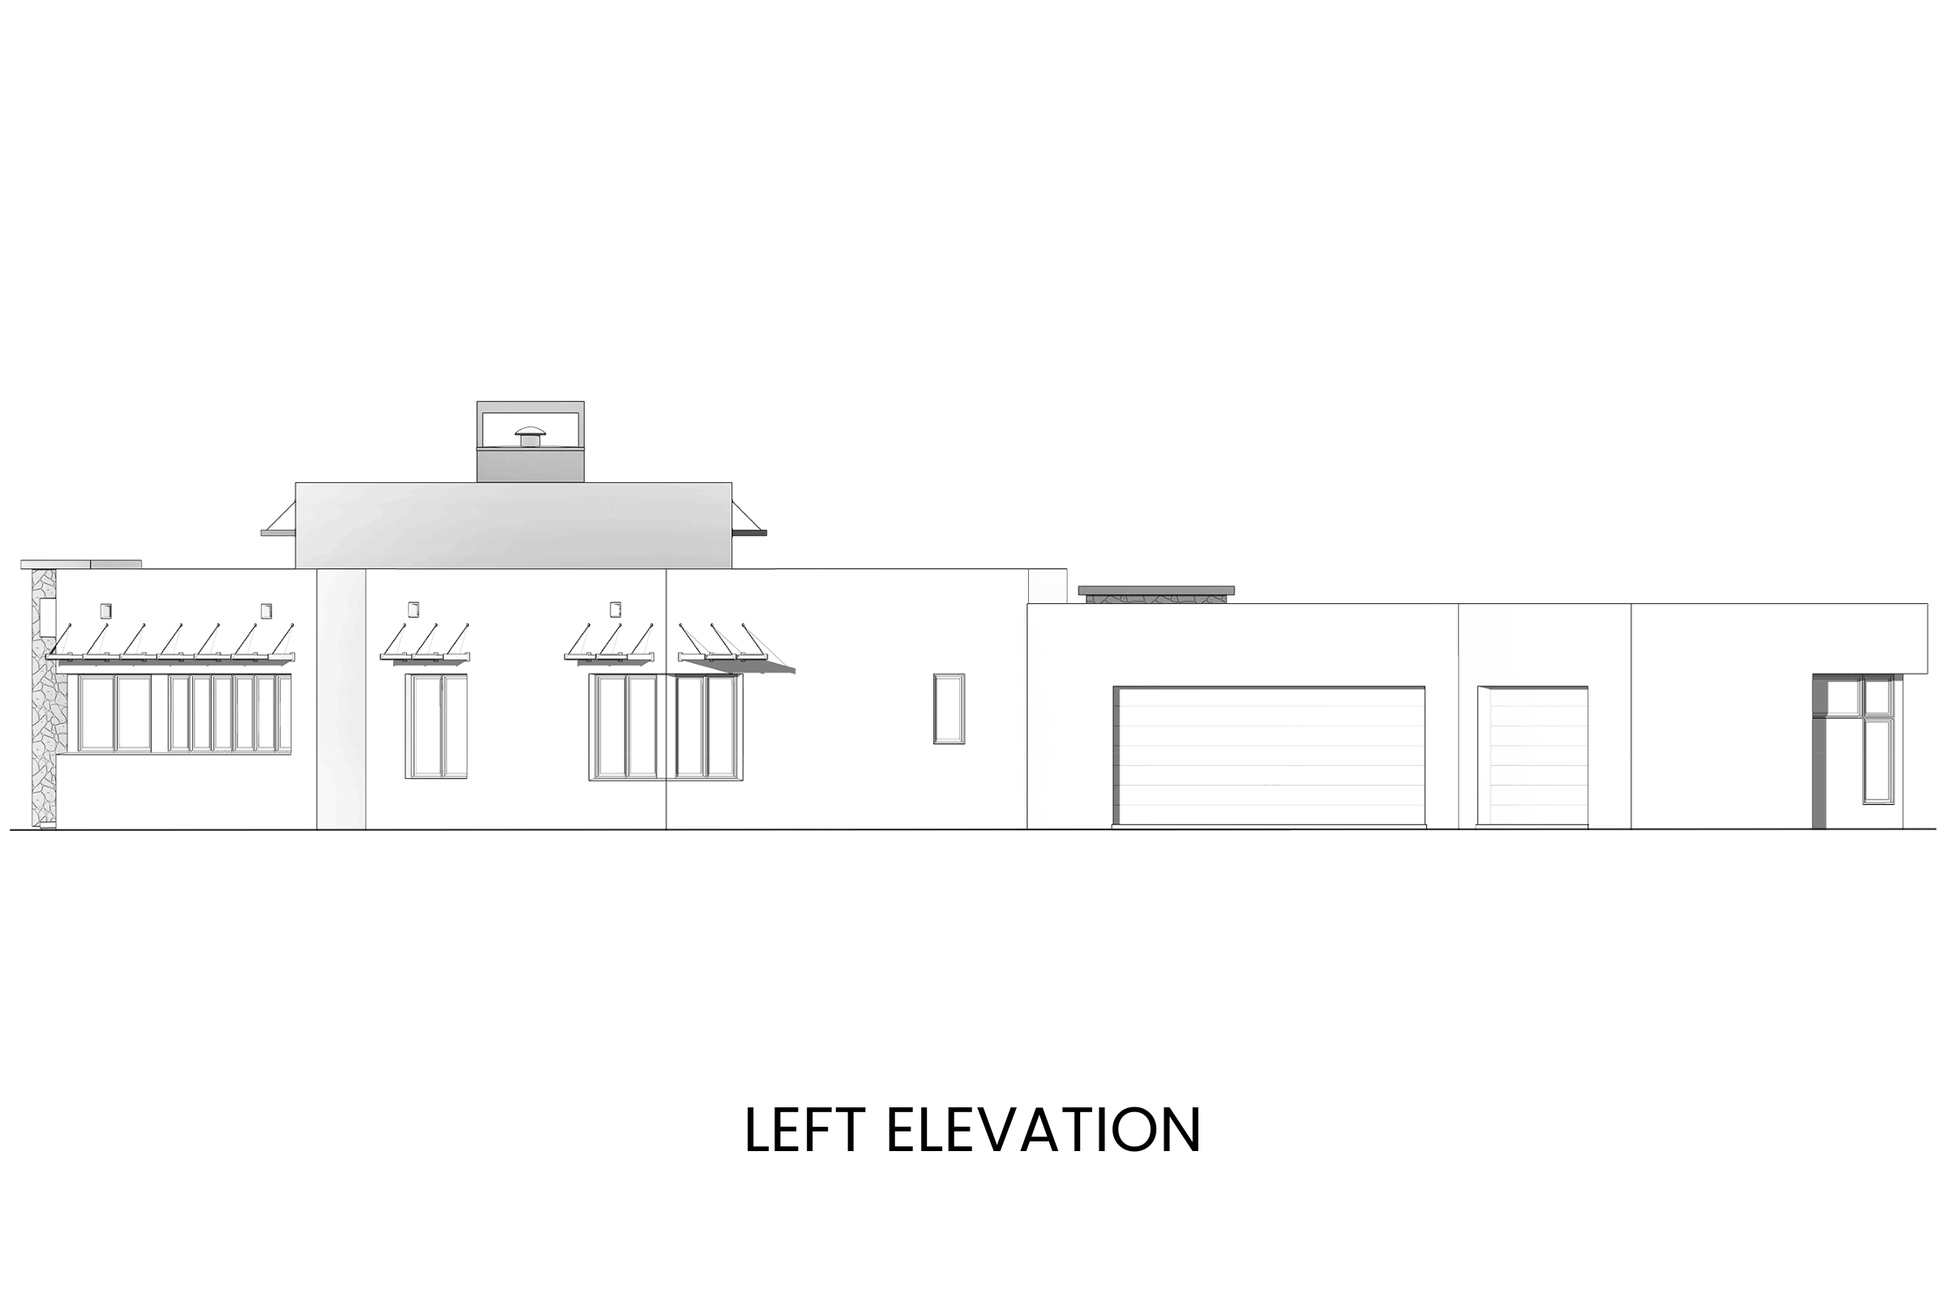 Modern-Minimalist-Ranch-Plan-for-Wide-Sites-Left-Elevation-Rocky-Mountain-Plan-Company-Crescent-Lake